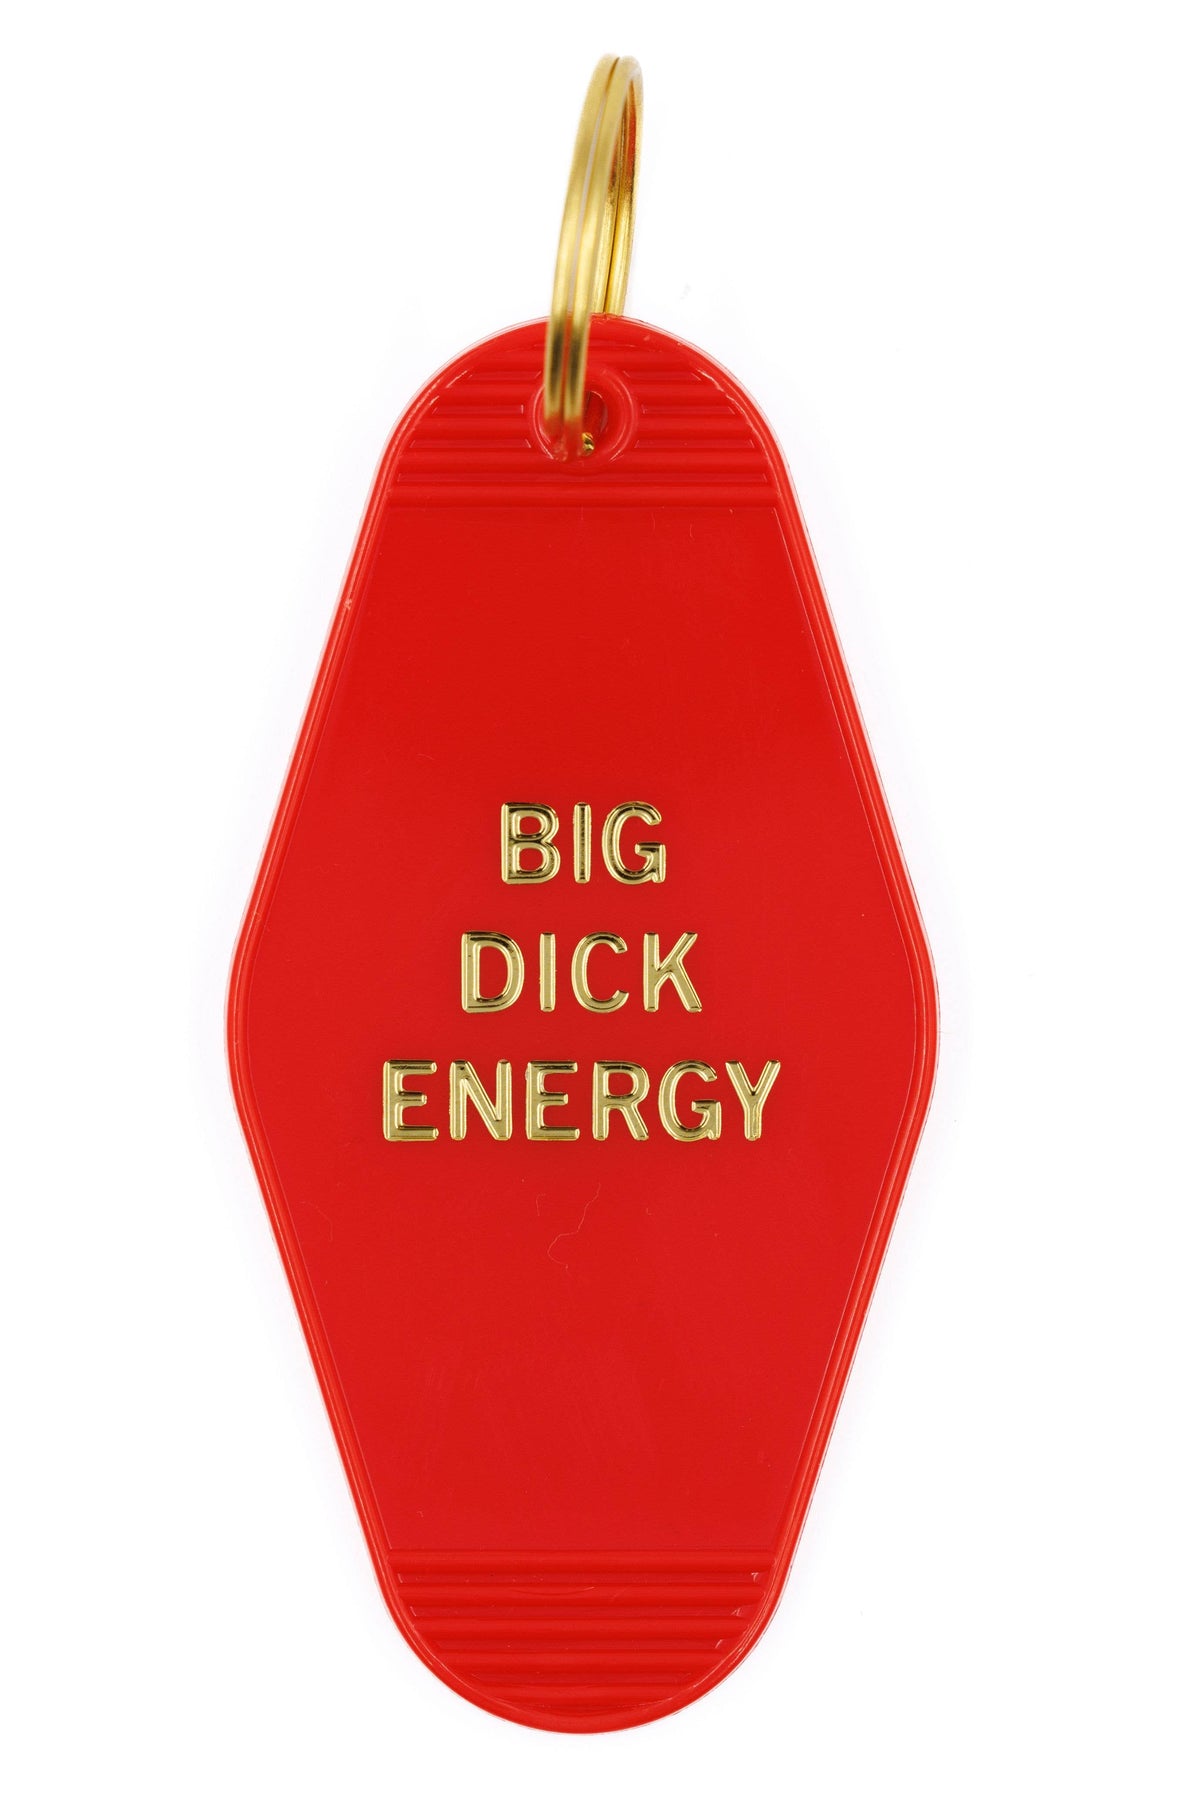 Big Dick Energy Motel Keychain in Red